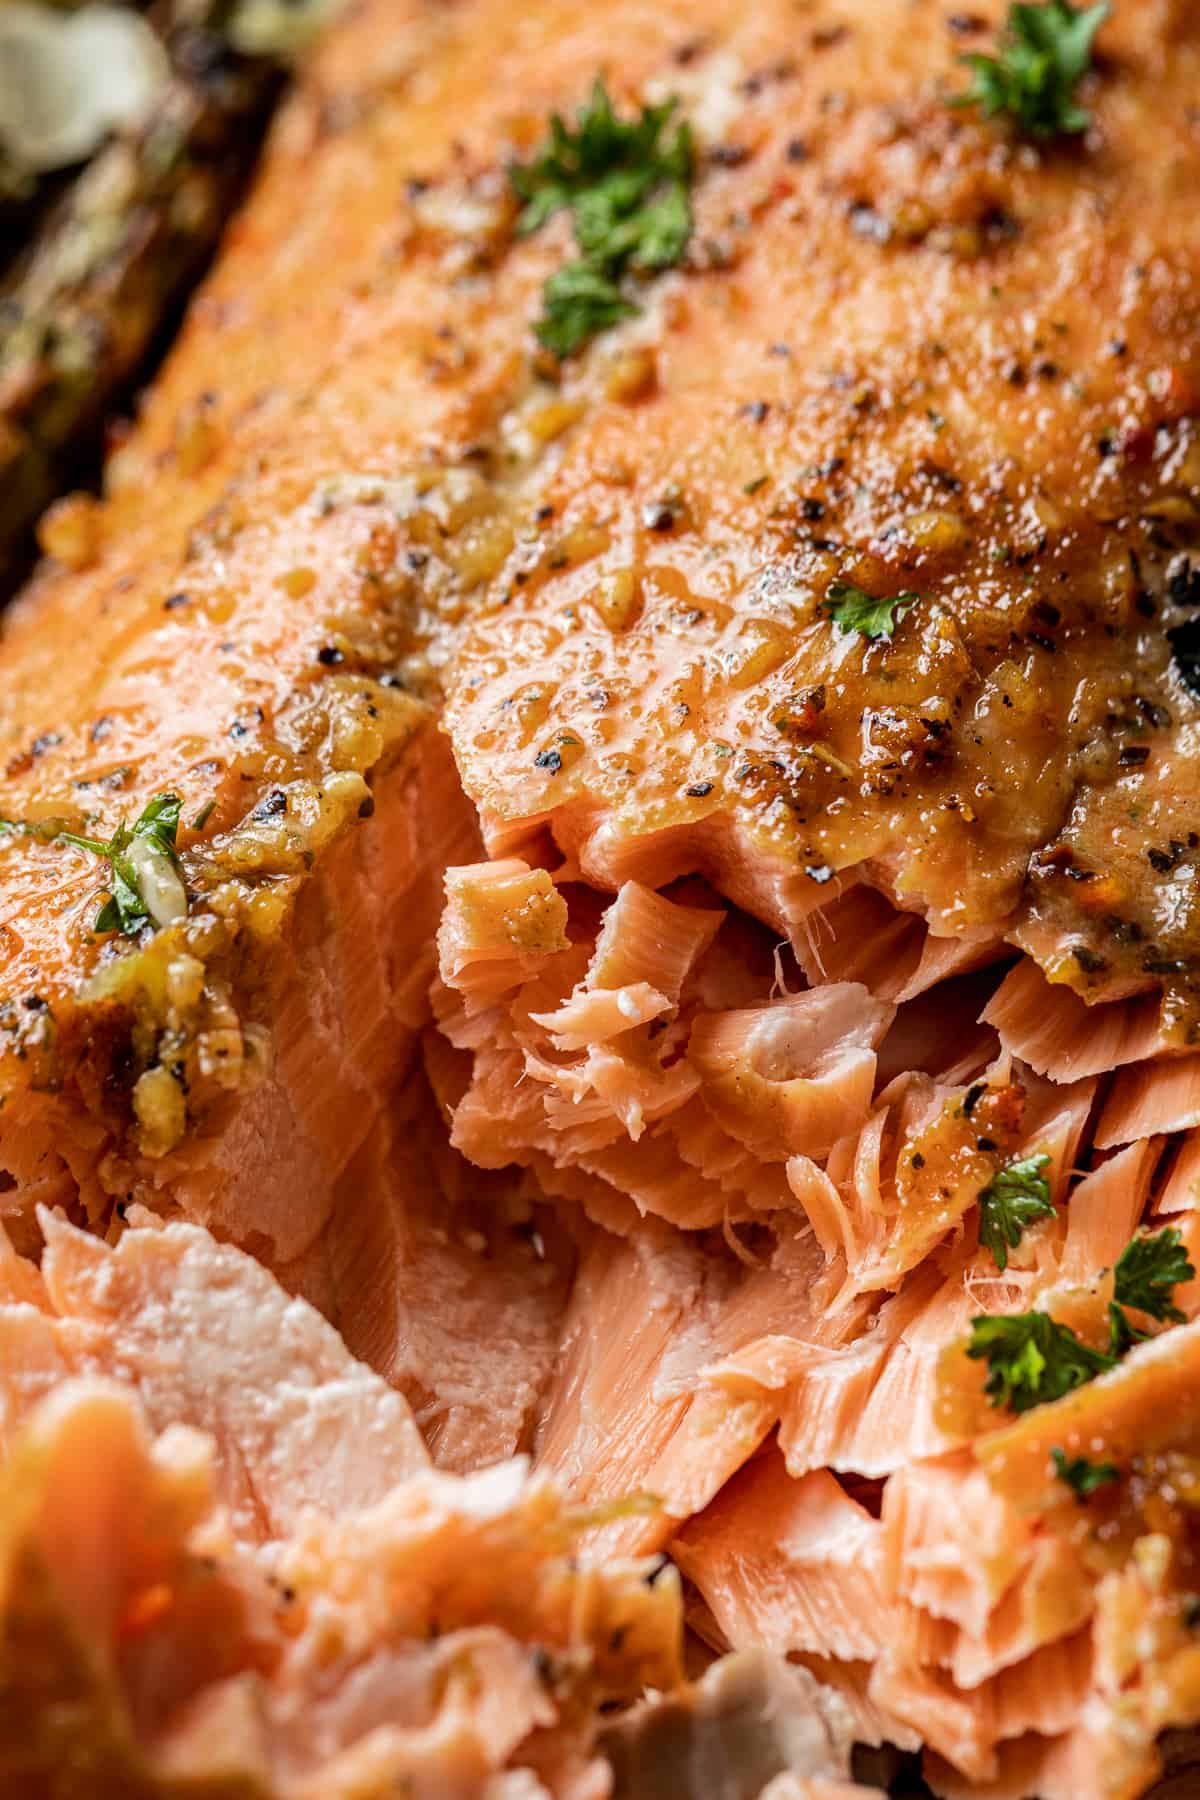 A closeup shot showing the flakes of a smoked king salmon (pacific salmon) fillet.